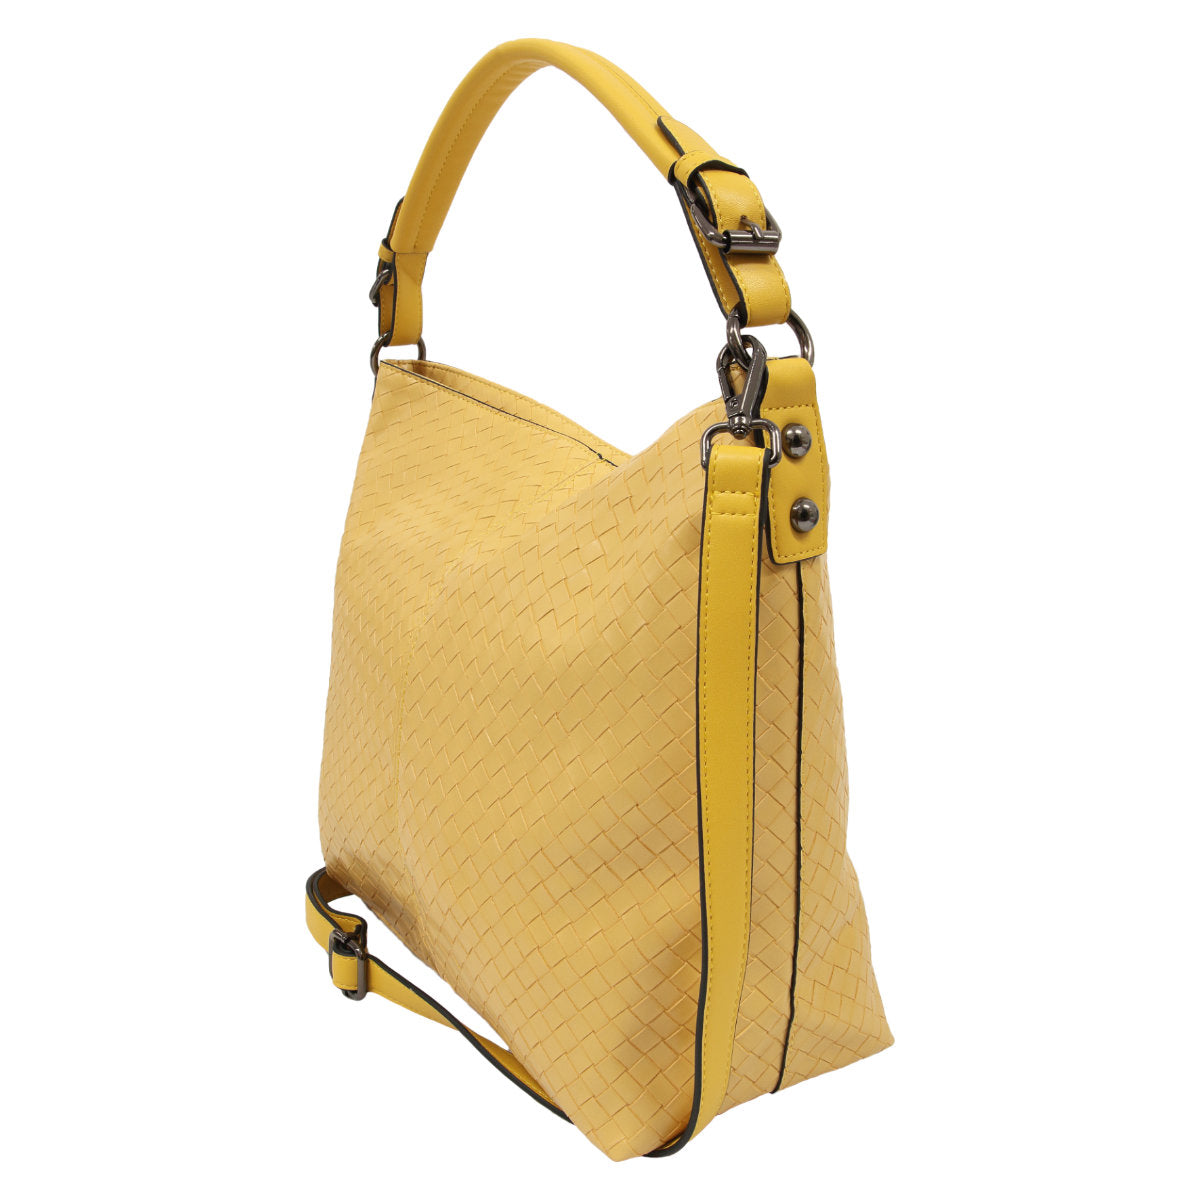 Tegan Woven Shoulder Bag: Fashionably discreet, yet quietly beautiful. The embossed basketweave with matching but slightly contrasting handle colour makes this bag a winner.
Dimensions: W 38c - Ciao Bella Dresses 